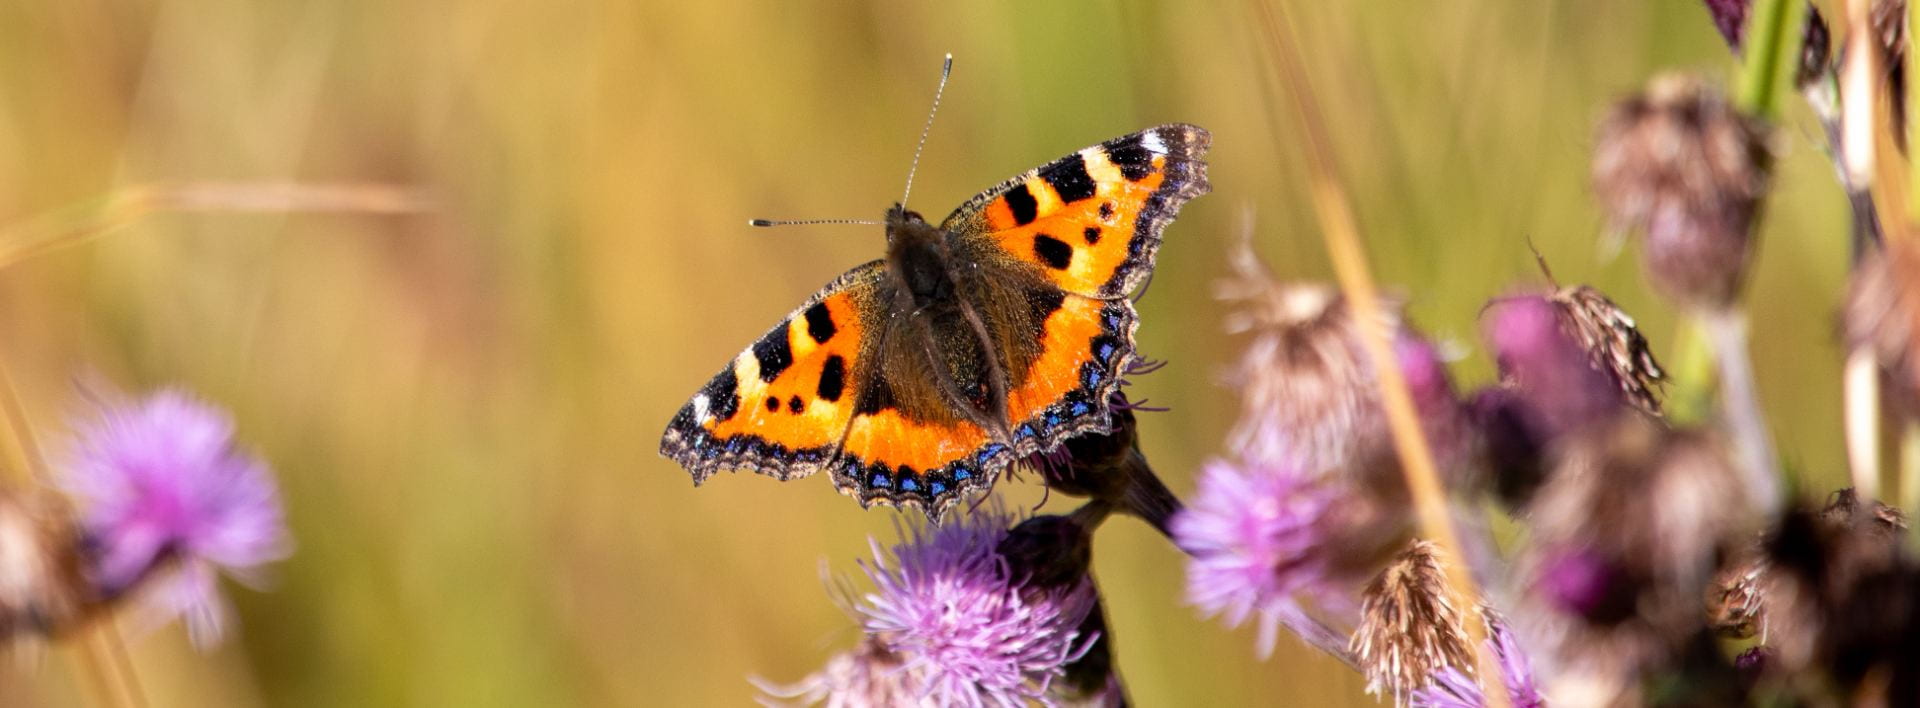 a butterfly on a purple thistle<br />
